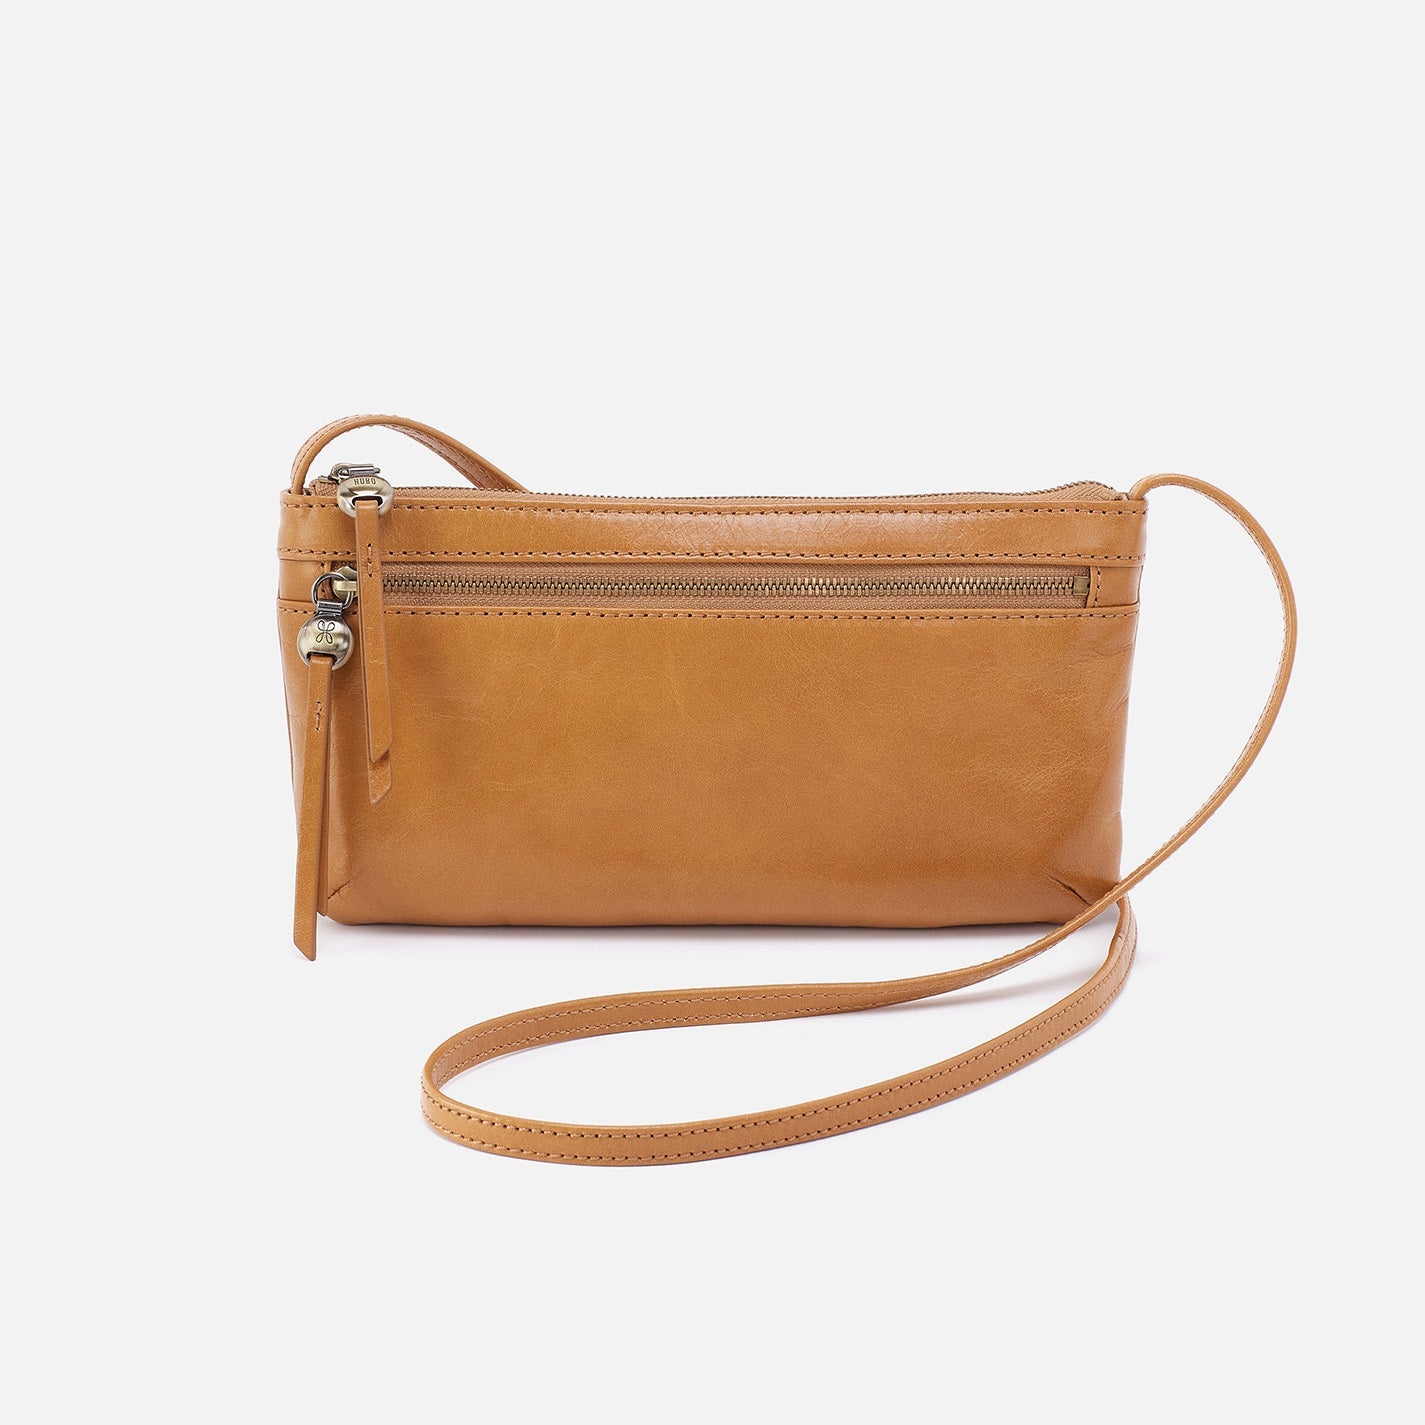 natural cara crossbody on a white background.